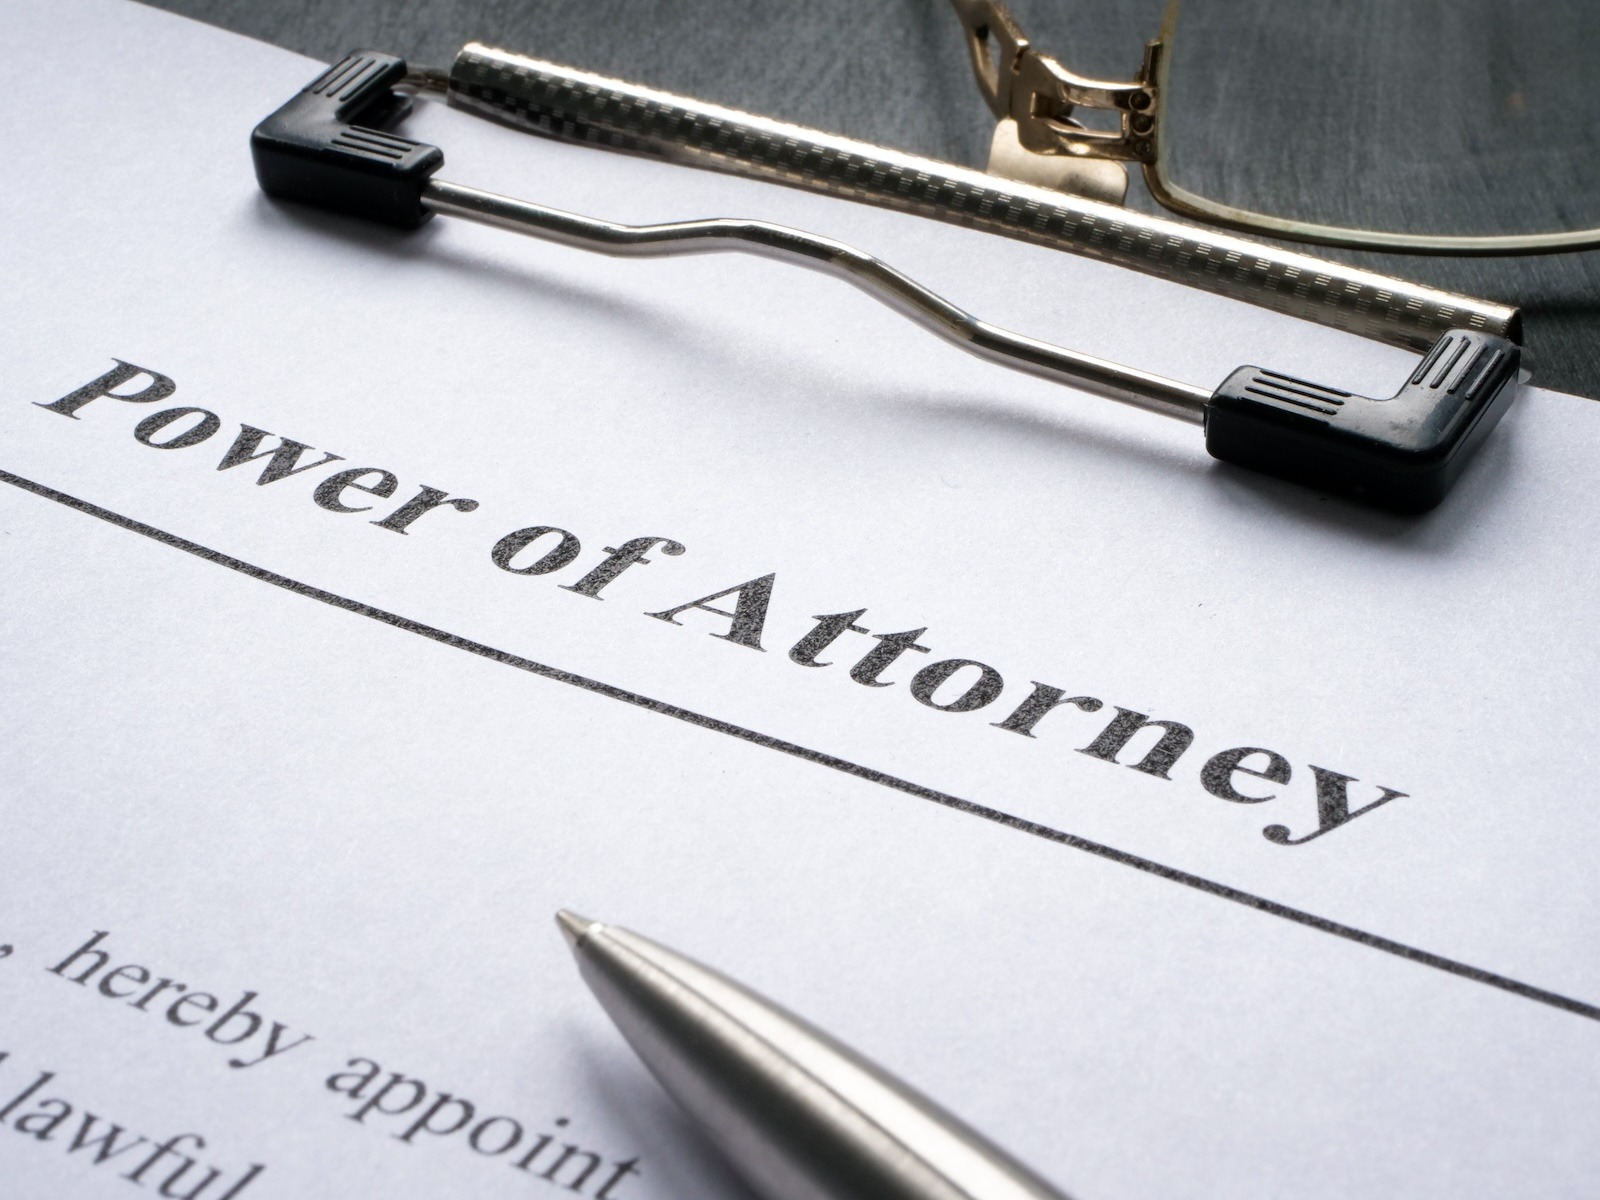 Power of Attorney. Estate Planning. A clipboard with a the top of a white paper with a large Power of Attorney title at the top